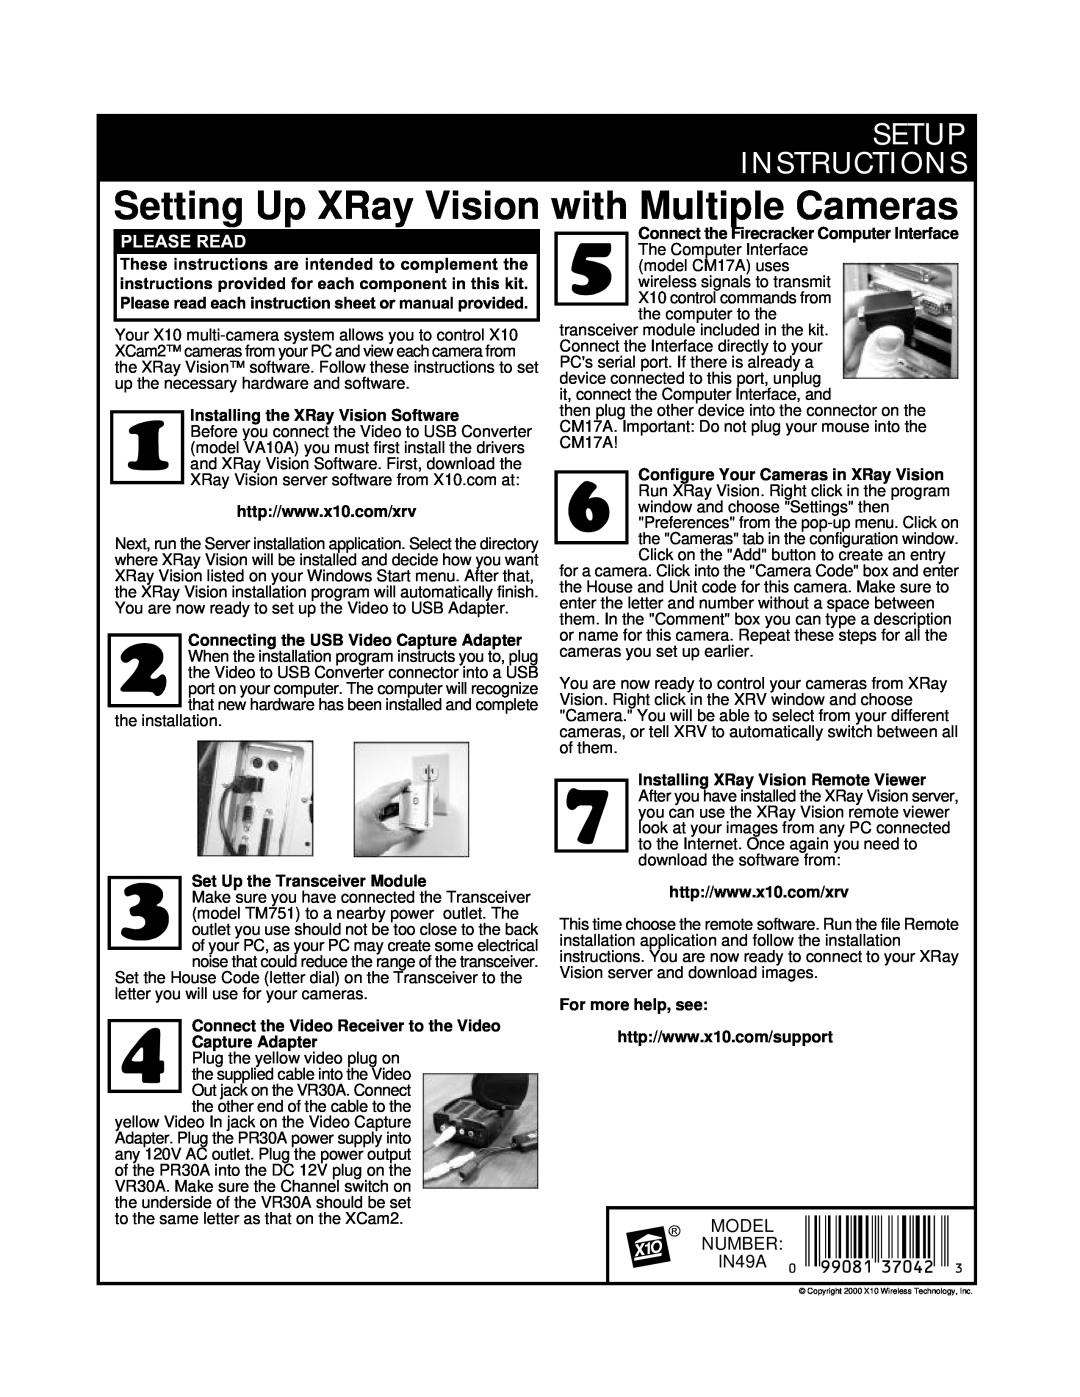 X10 Wireless Technology IN49A installation instructions Setting Up XRay Vision with Multiple Cameras, Setup Instructions 